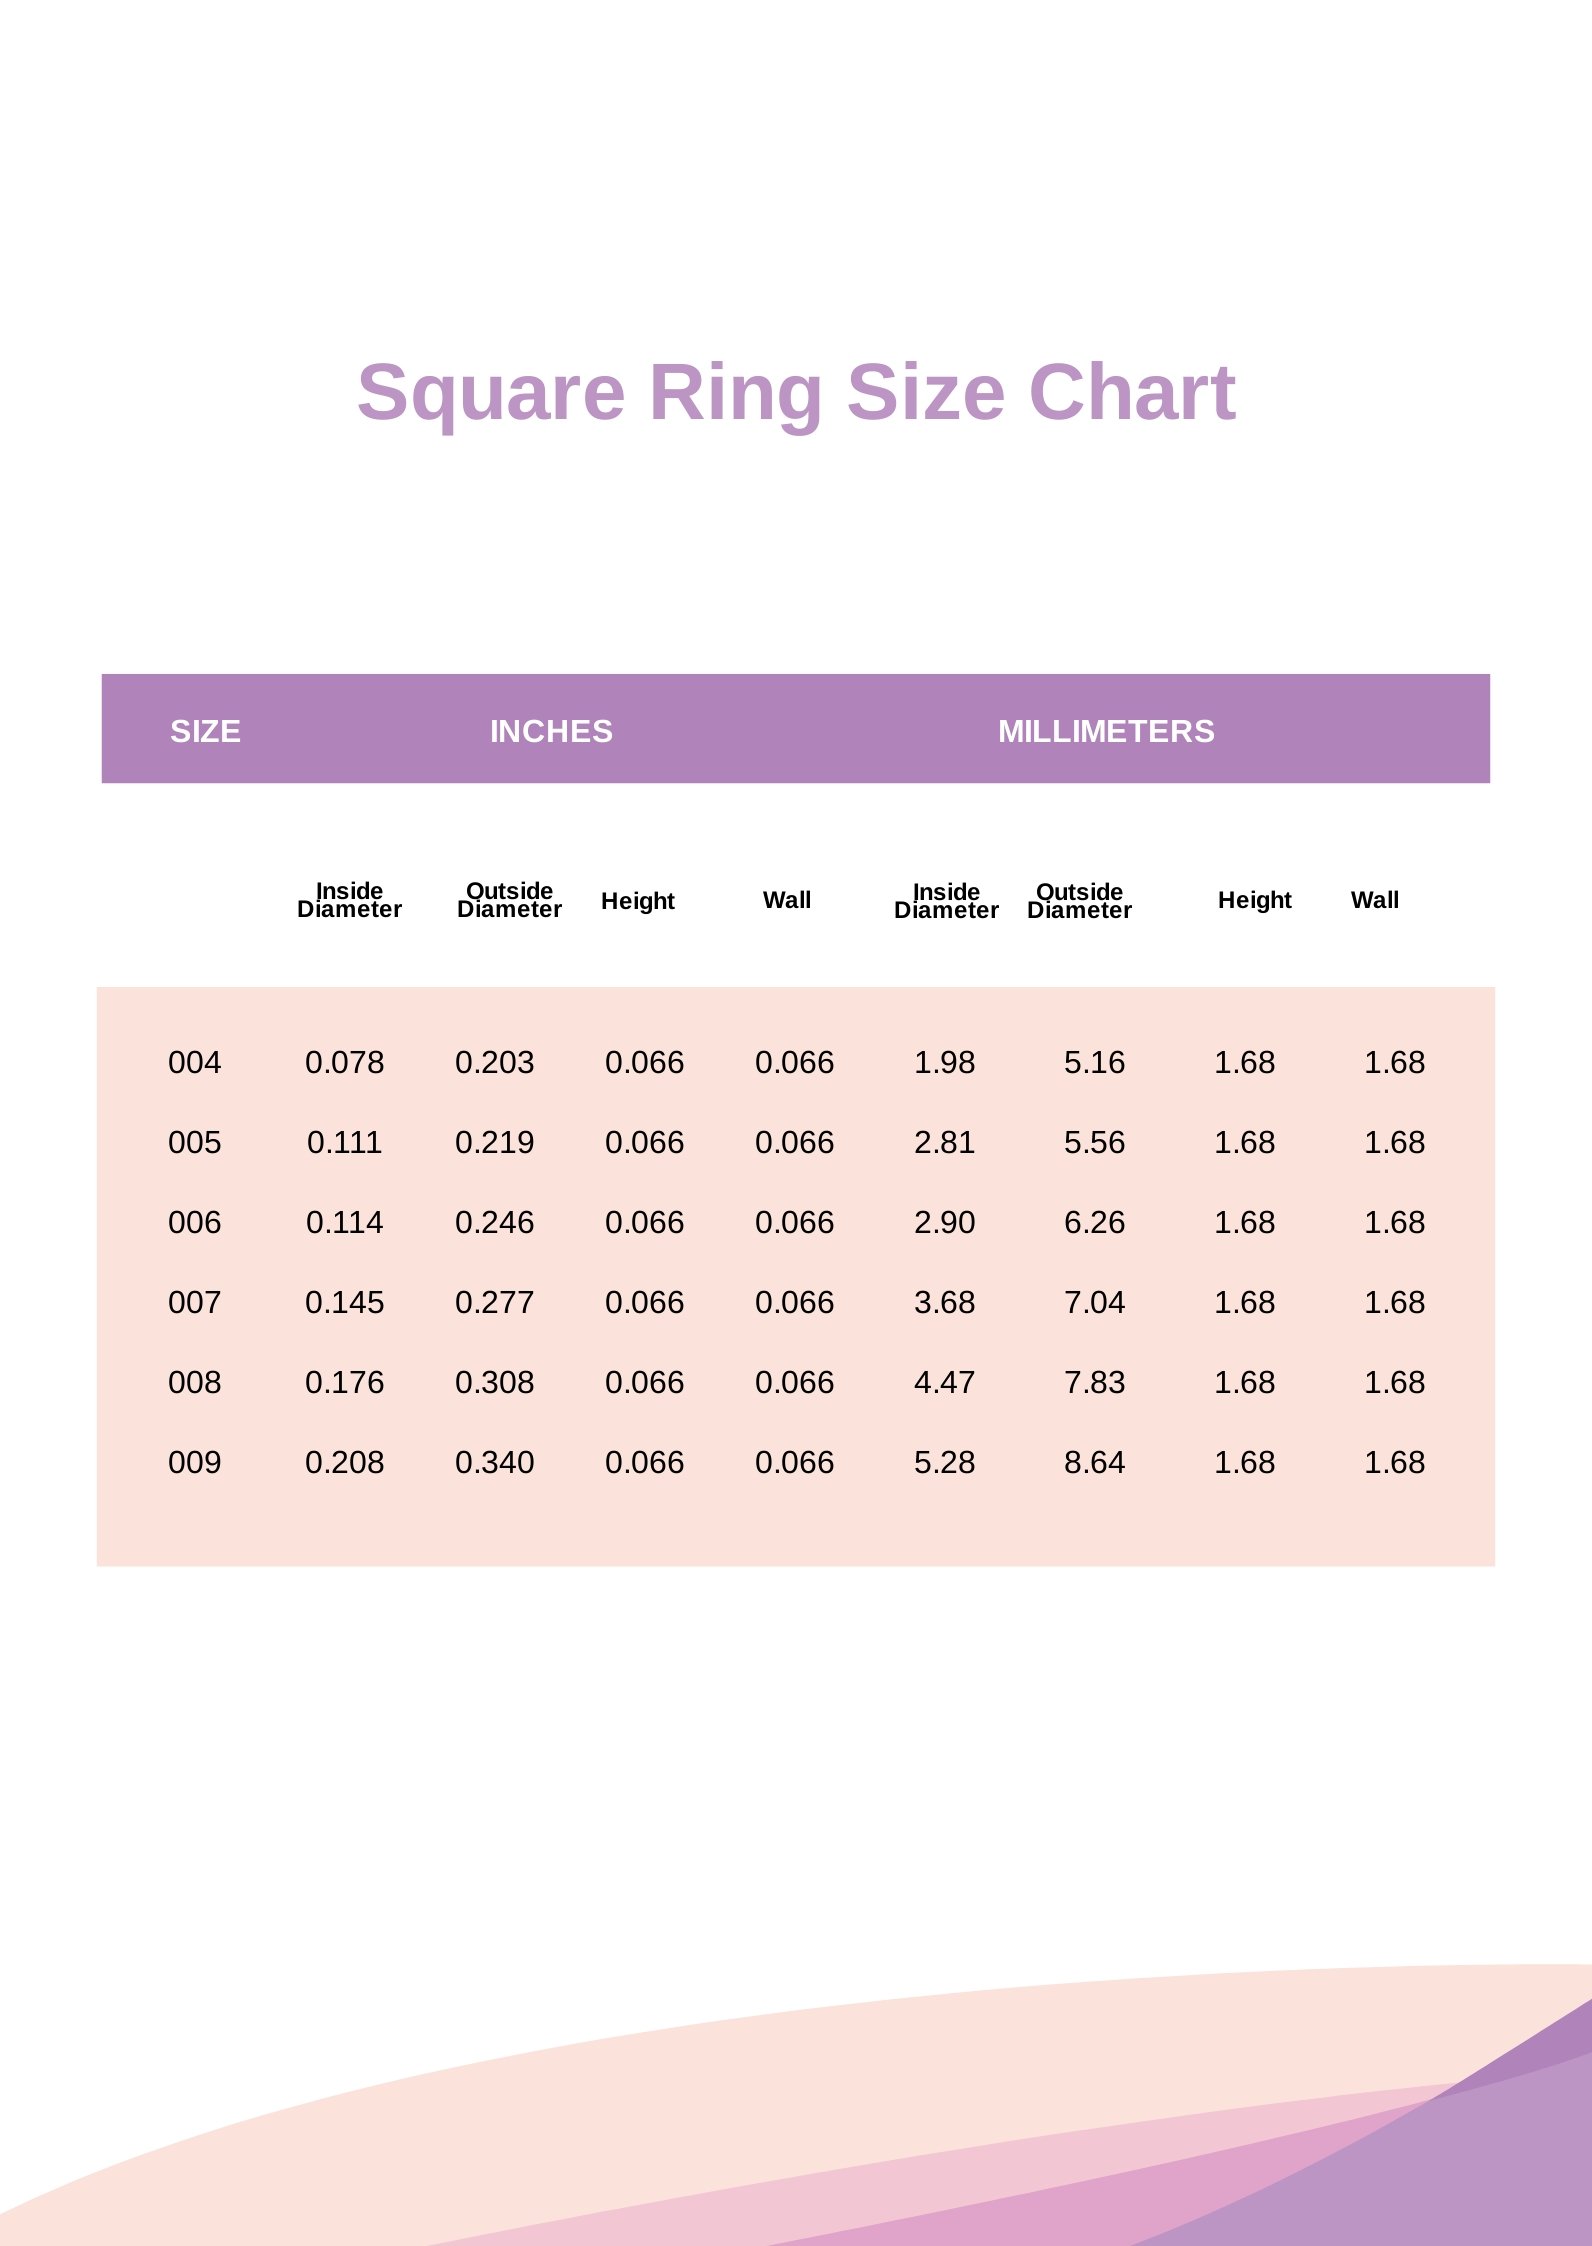 Square Ring Size Chart